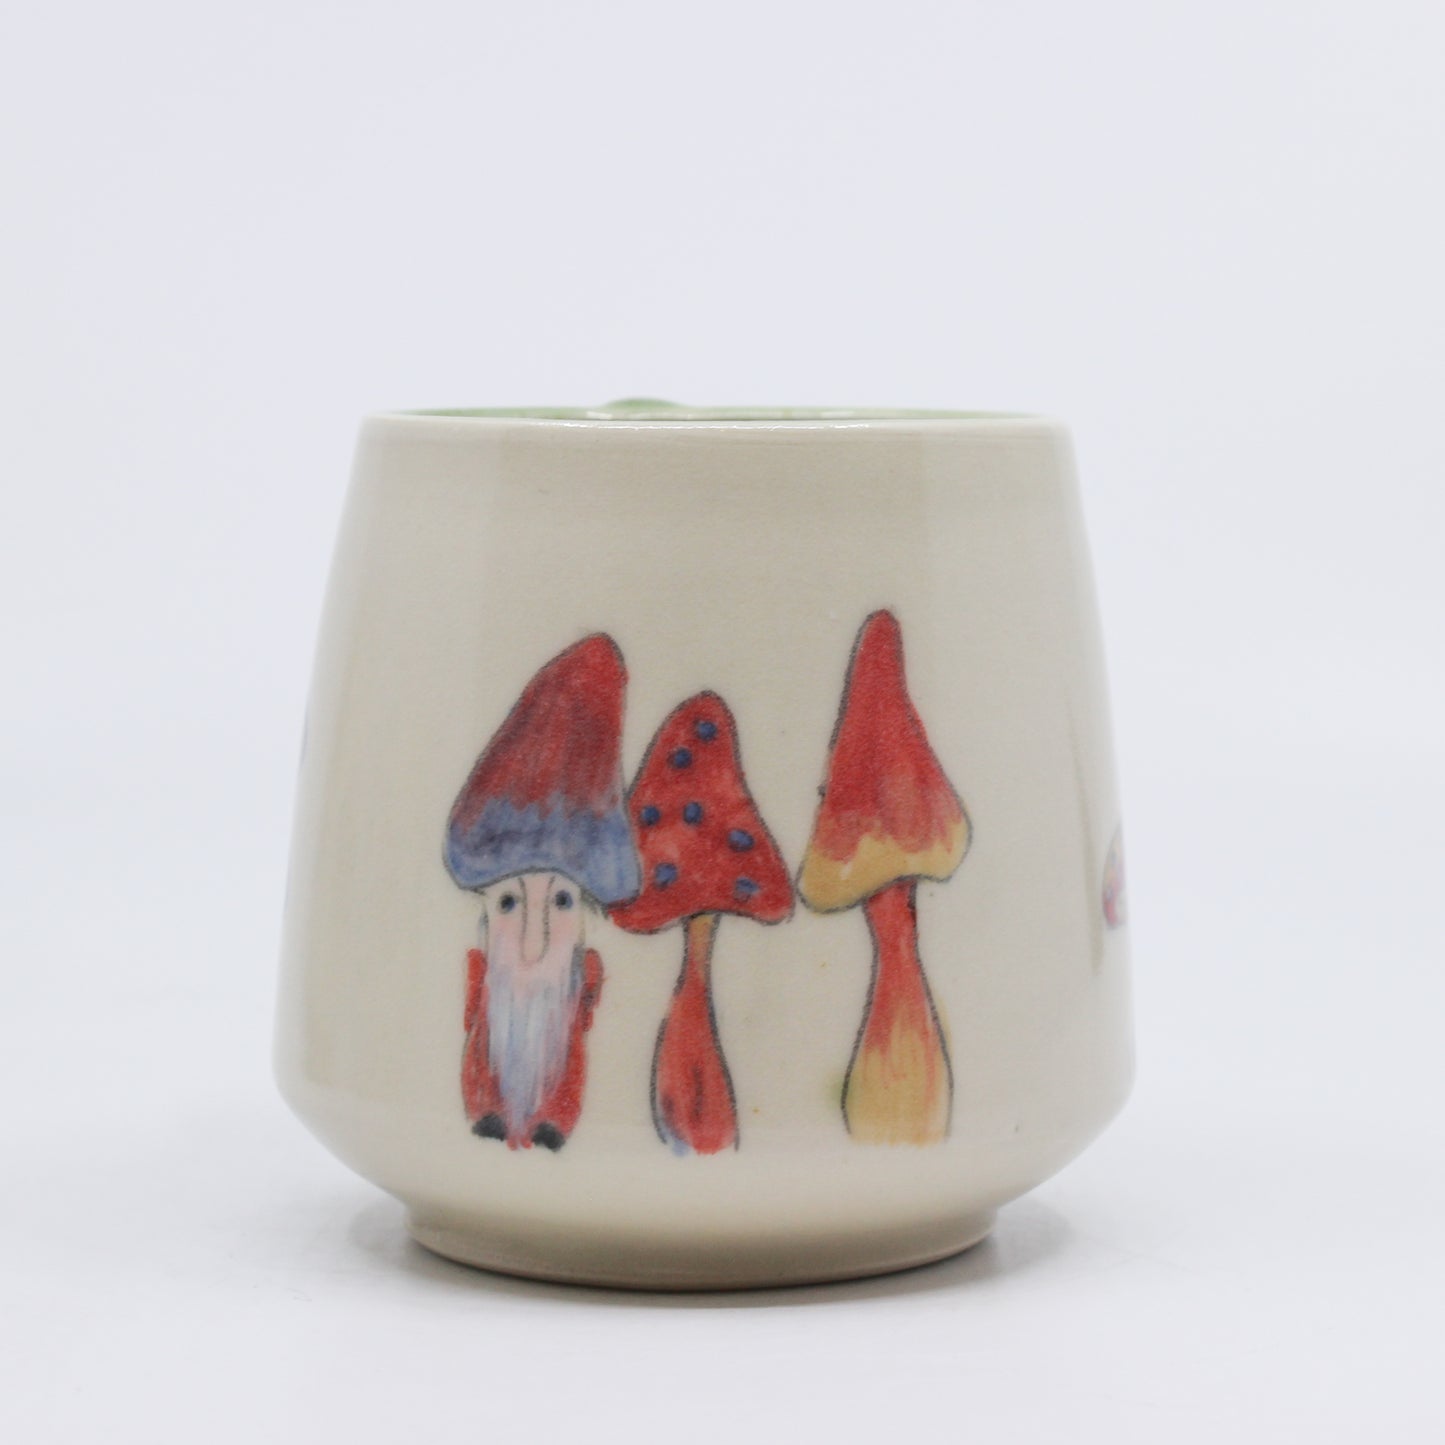 Hand painted gnome hiding with mushrooms on a mug